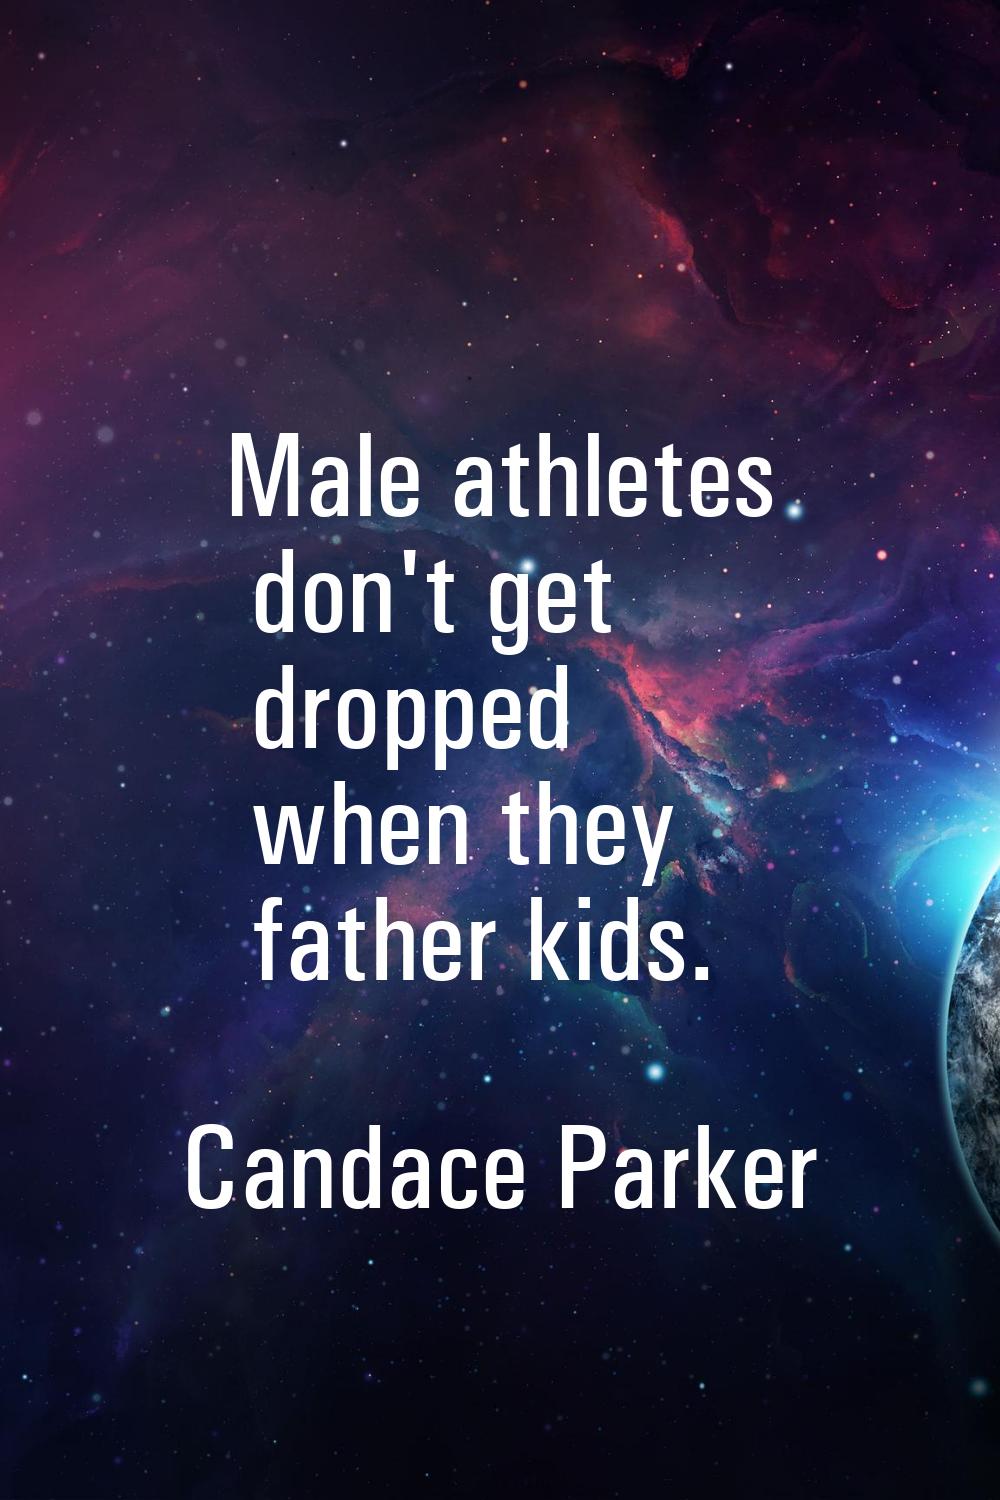 Male athletes don't get dropped when they father kids.